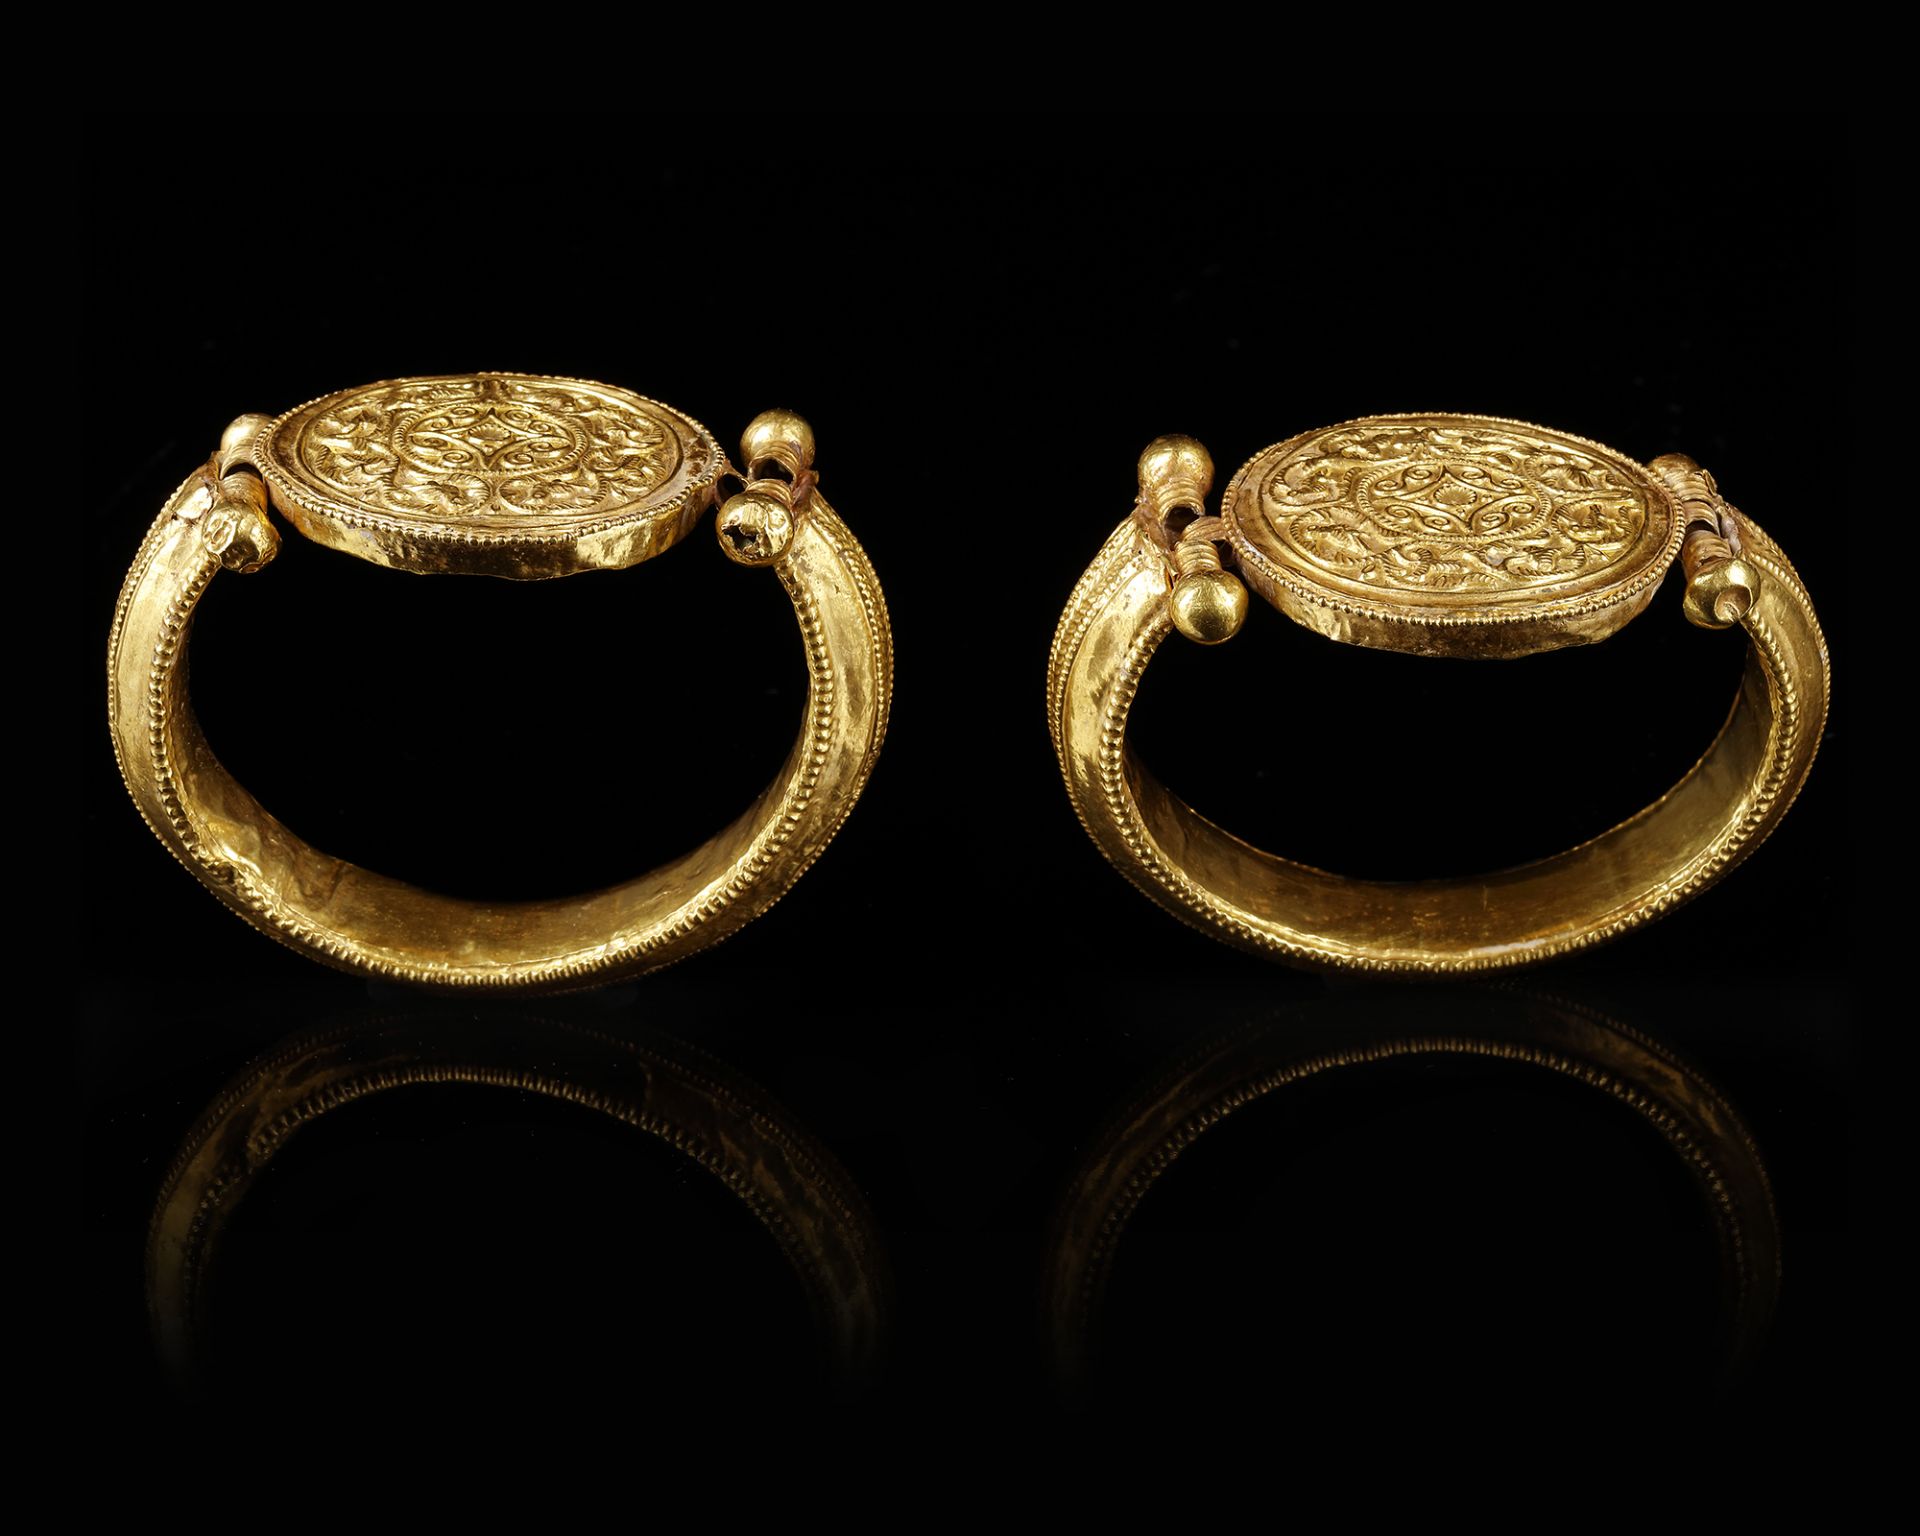 A RARE PAIR OF A FATIMID GOLD BRACELETS, POSSIBLY SYRIA, 11TH CENTURY - Image 11 of 14